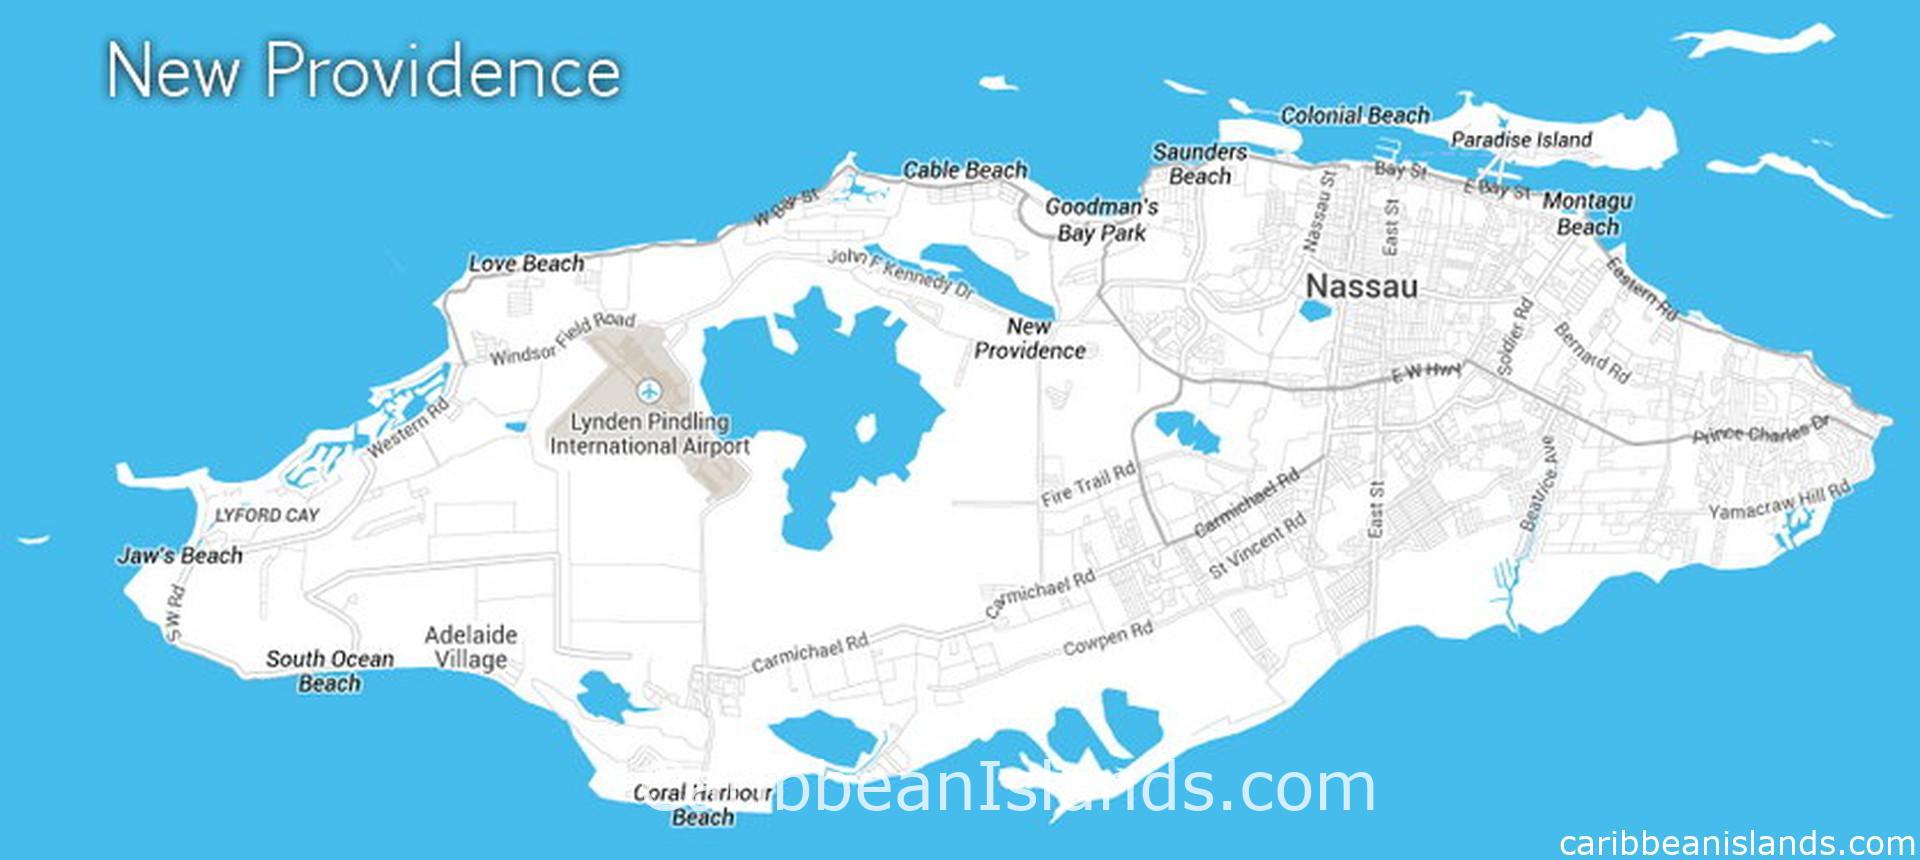 New Providence map